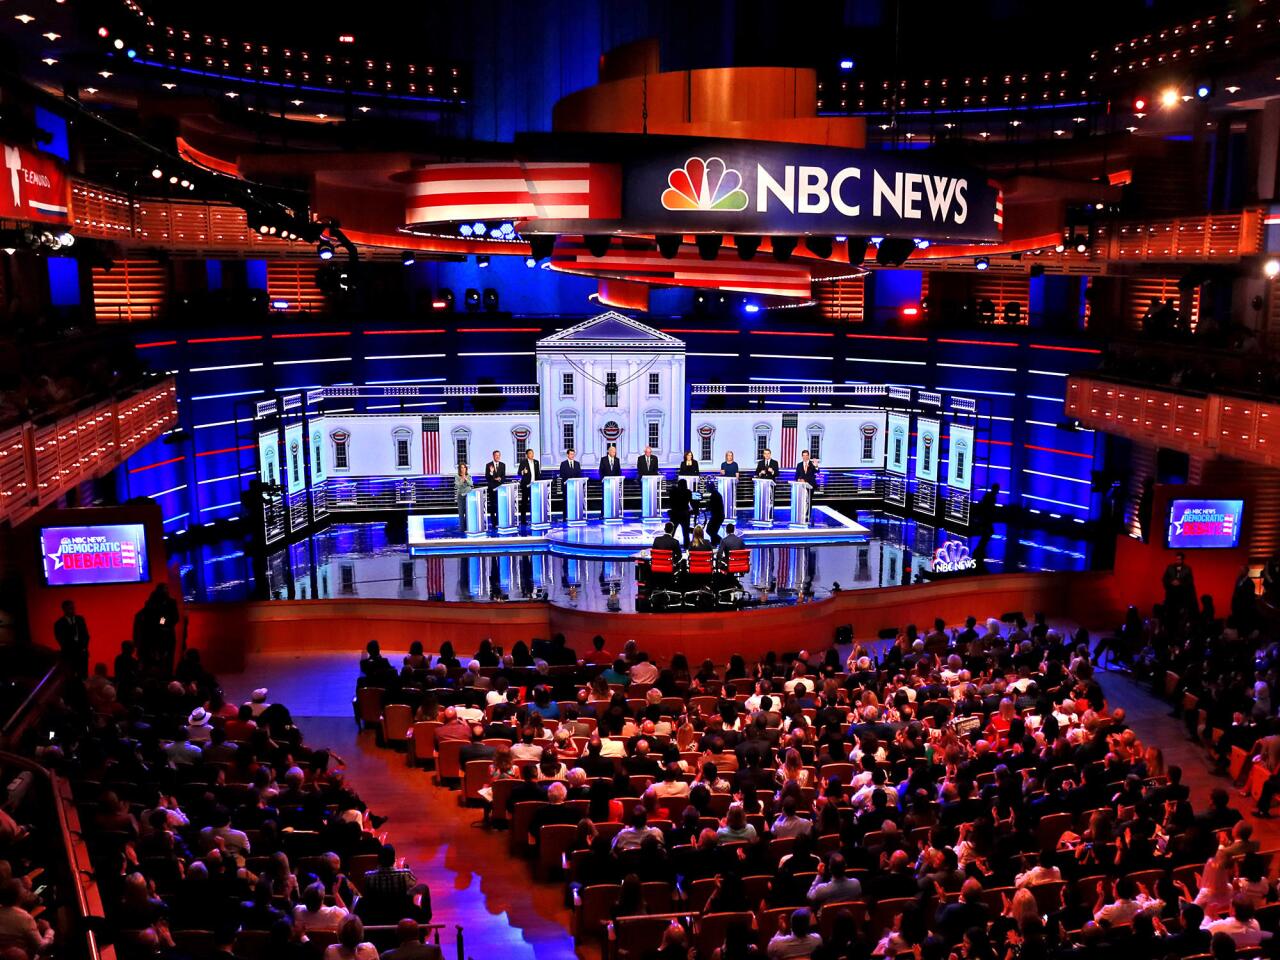 10 more candidates for the Democratic presidential nomination gathered at Miami's Adrienne Arsht Center for the Performing Arts for Thurday's debate.